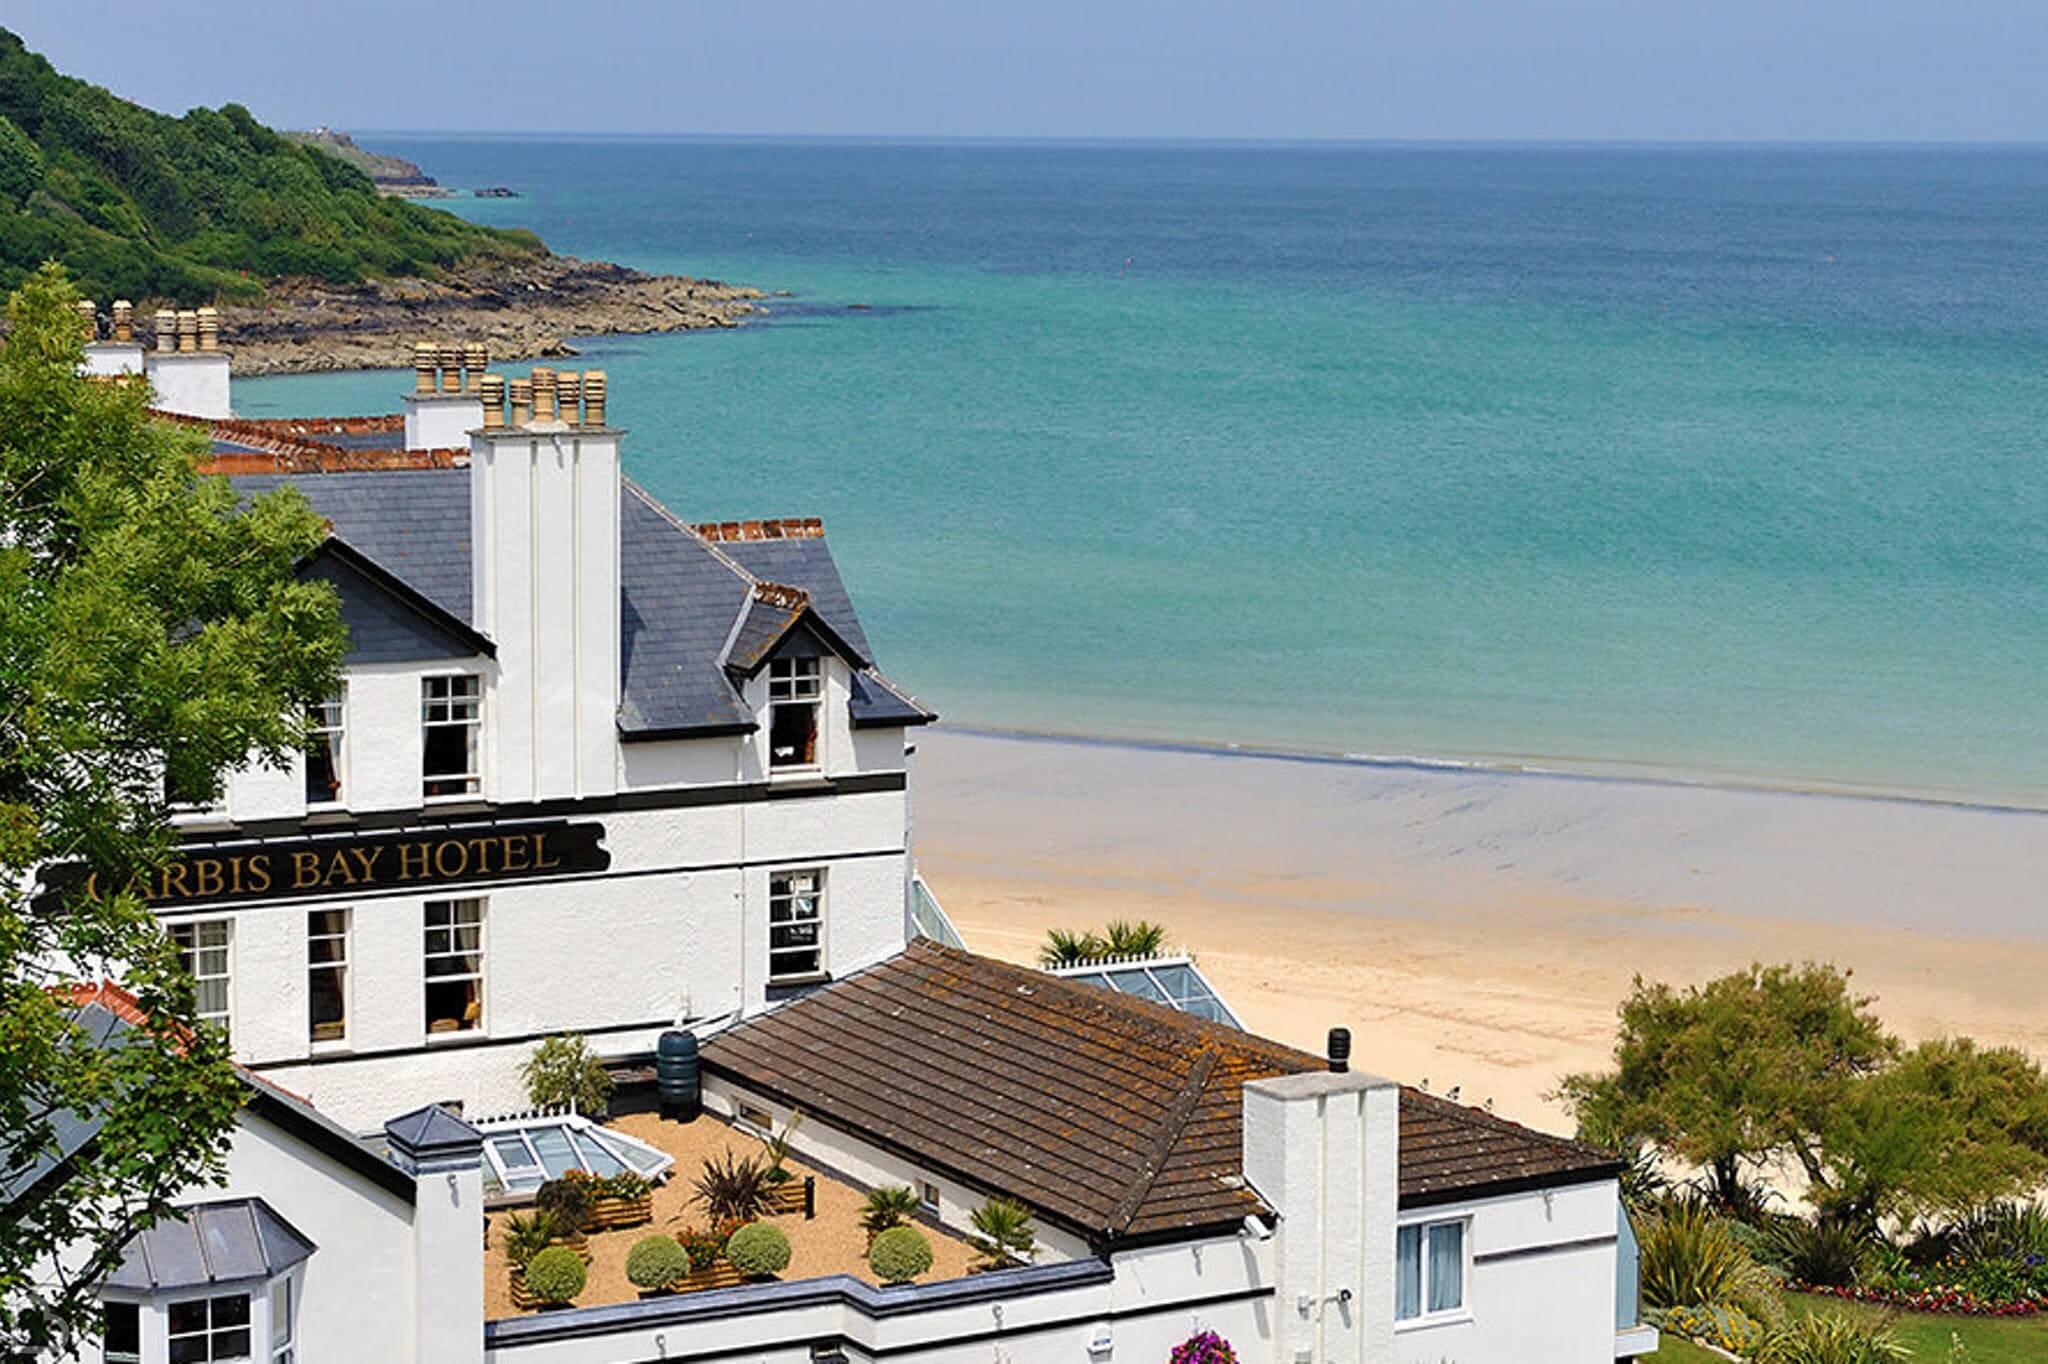 carbis bay hotel on a overlooking the sea on a beautiful sunny day 